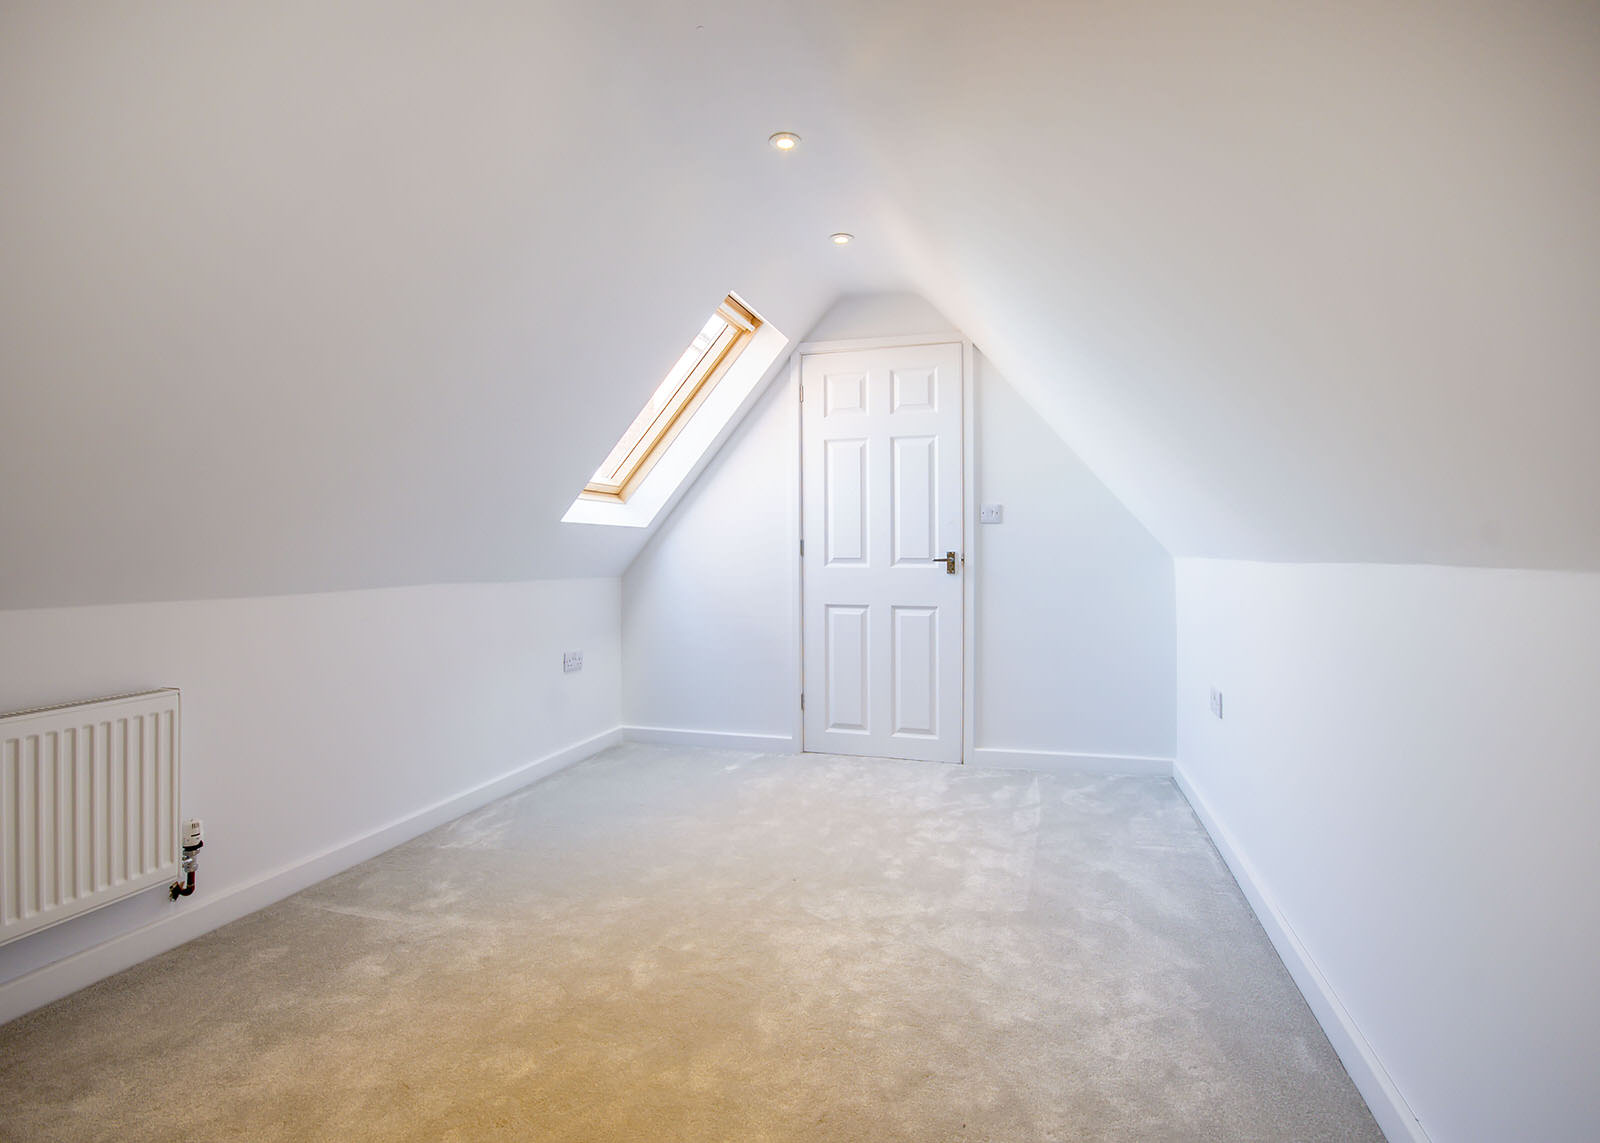 Loft Conversions What You Need To, Do I Need Planning Permission To Convert Loft Into Bedroom